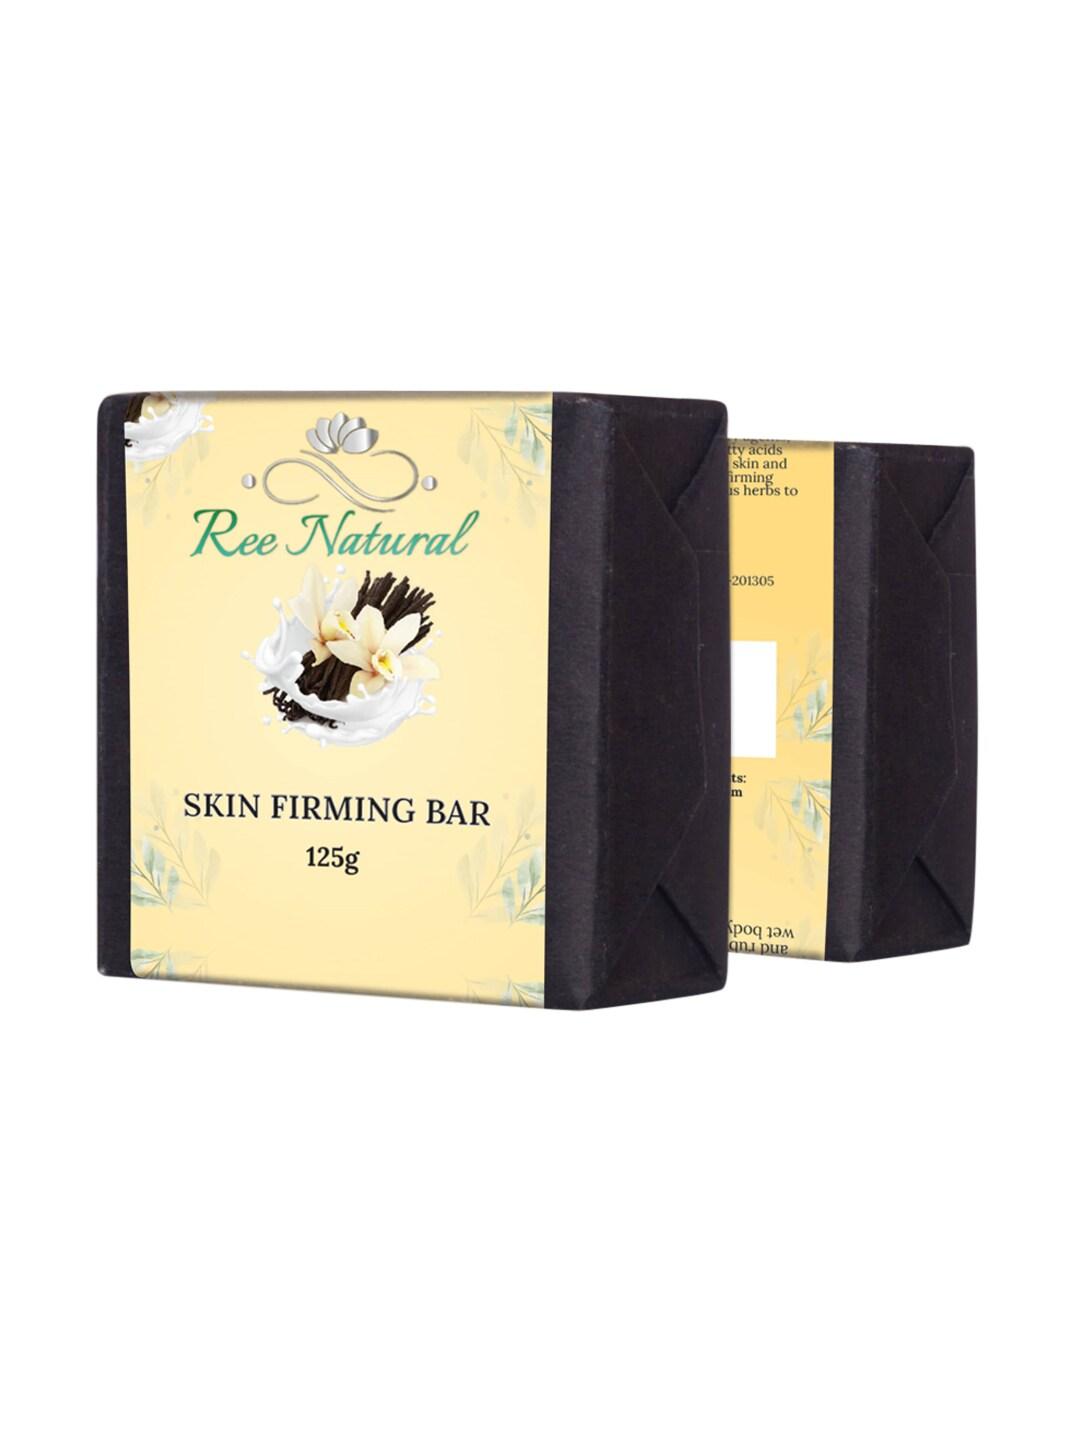 Ree Natural Cold Processed Skin Firming Bar - 125g